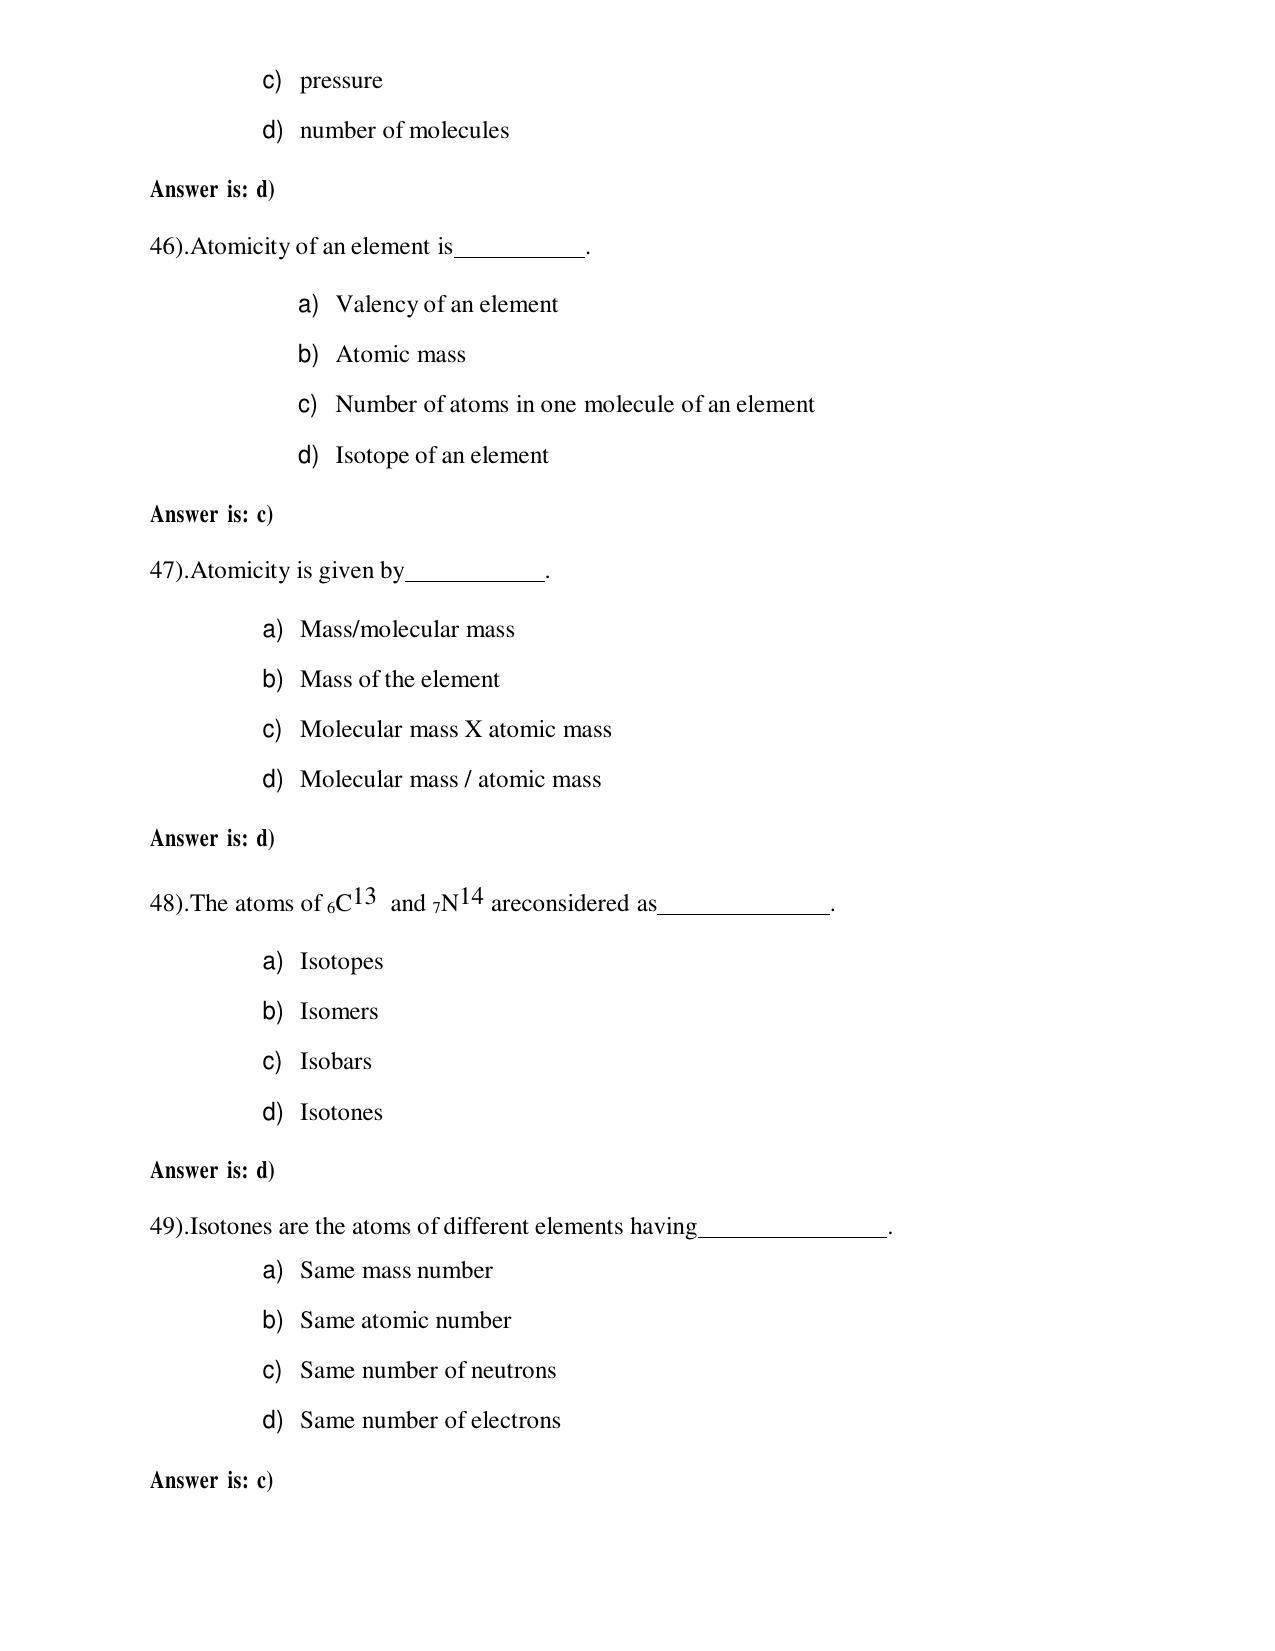 OUAT Chemistry Sample Paper - Page 11